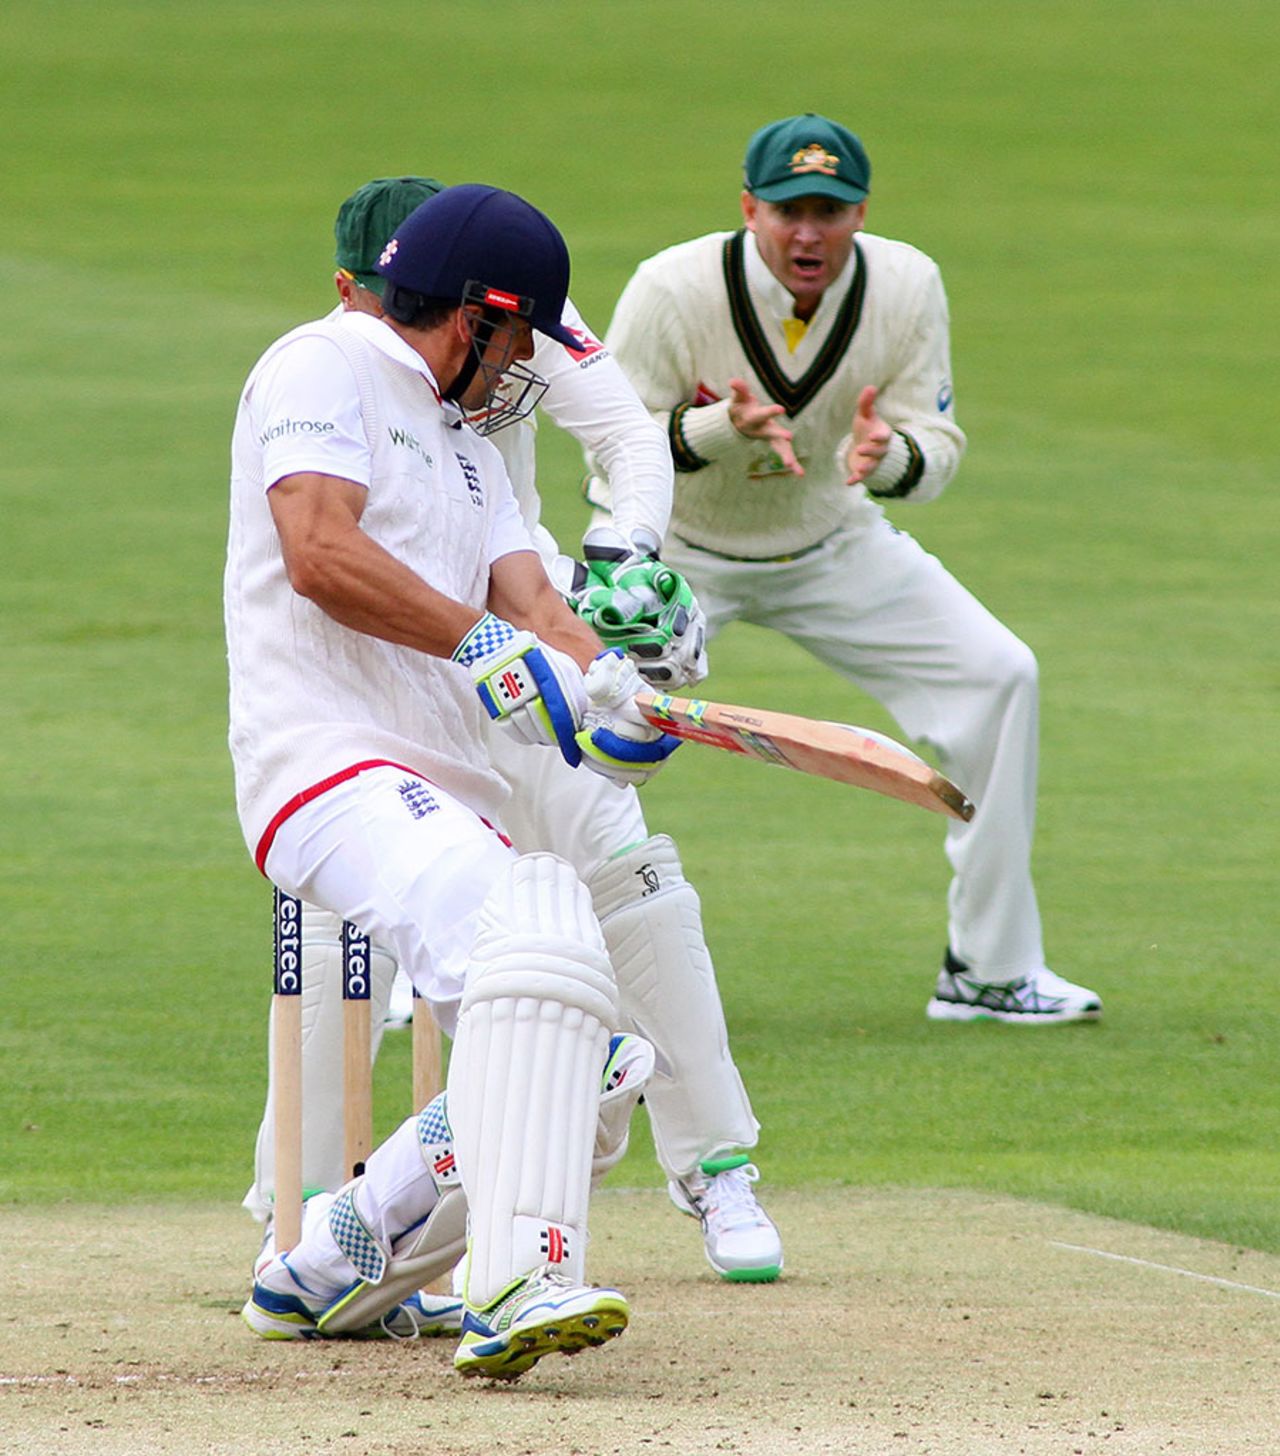 An anxious Michael Clarke watches Brad Haddin pouch Alastair Cook's top edge, England v Australia, 1st Investec Ashes Test, Cardiff, 1st day, July 8, 2015